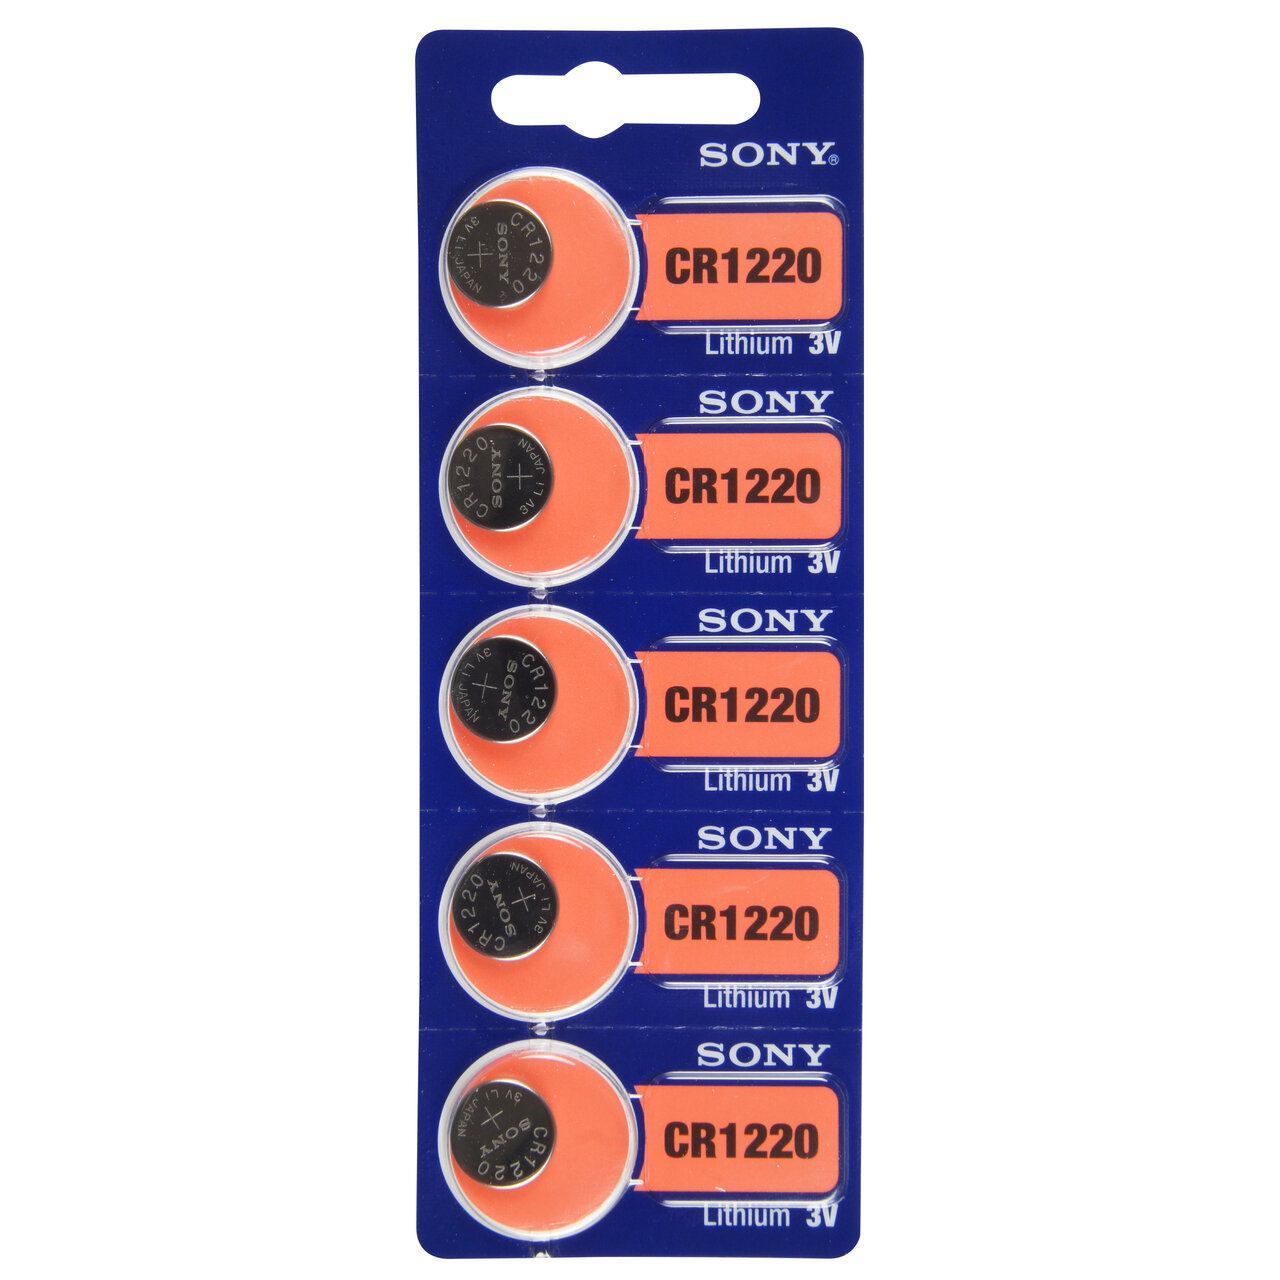 Type 1220 SONY Lithium Battery Tear Strip Pack of 5 SWB1220